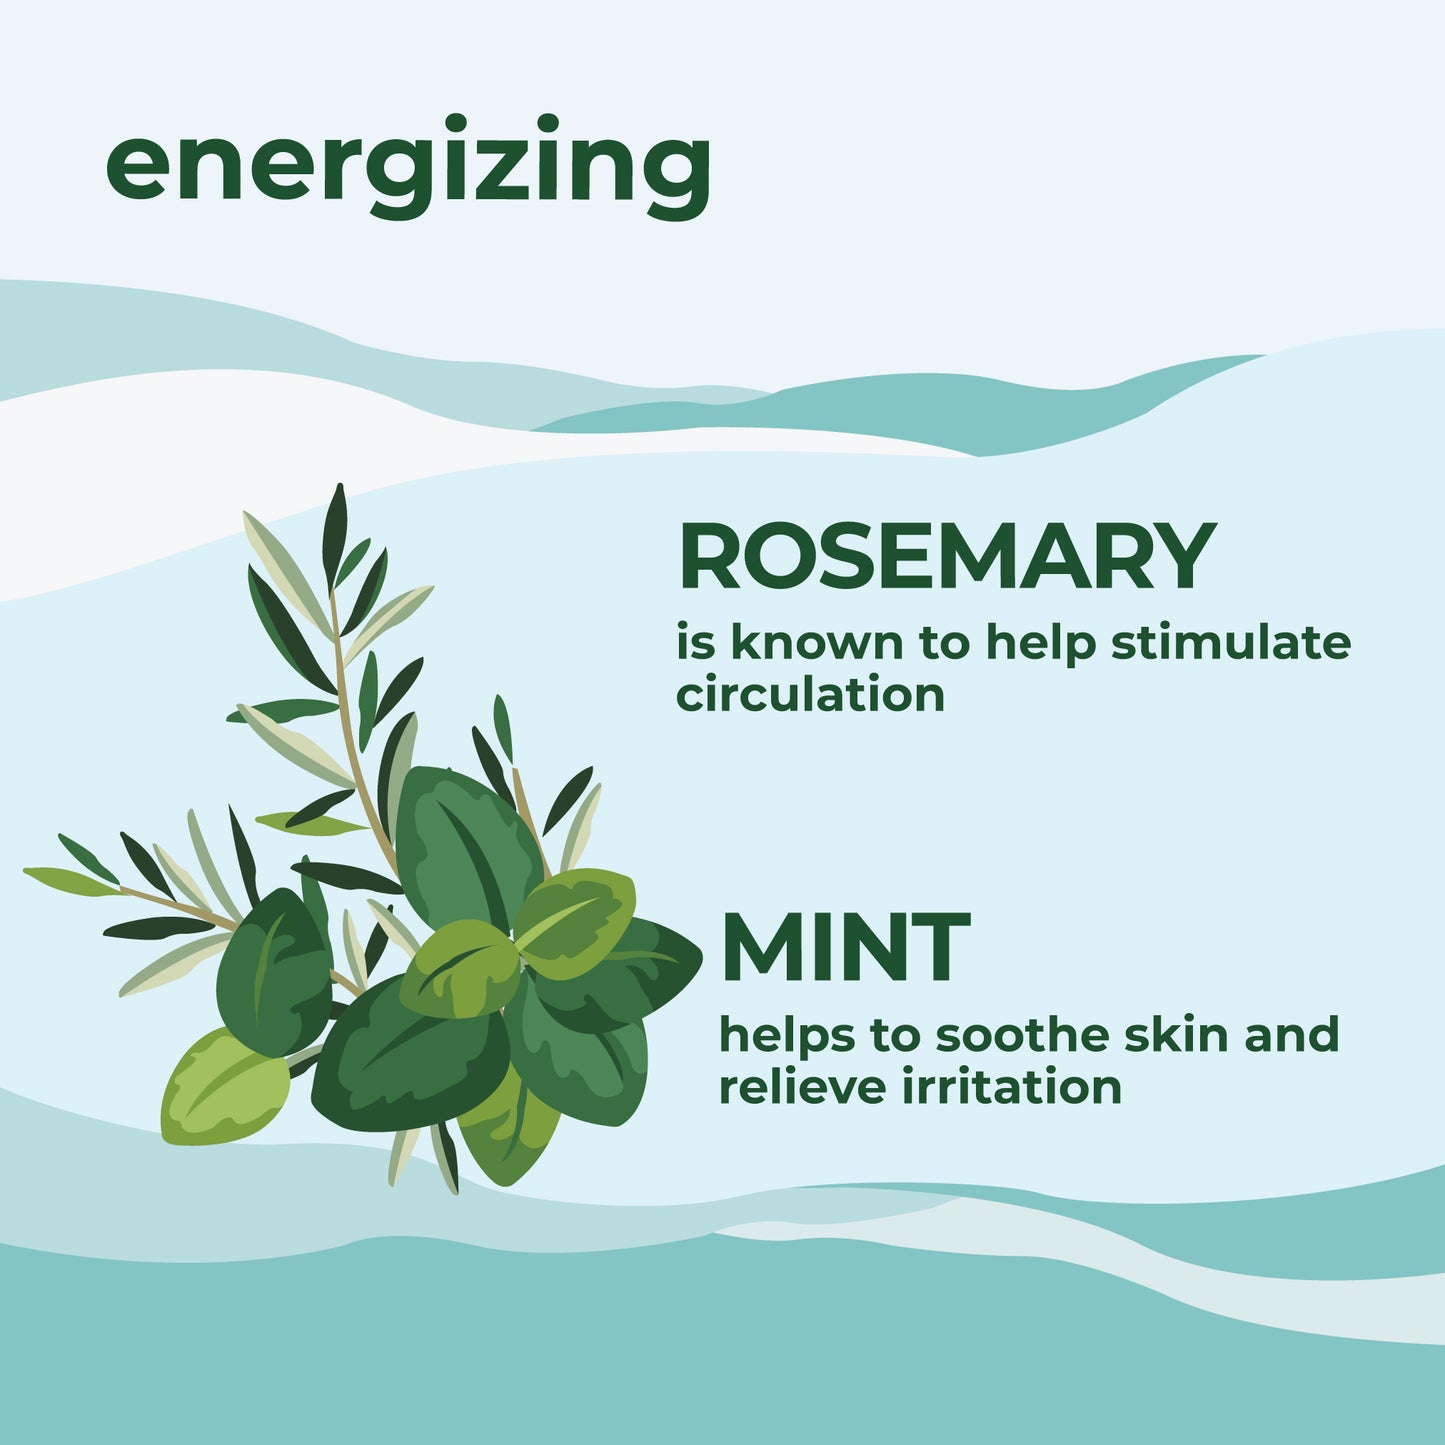 Energizing Bath & Shower Gel with Rosemary & Mint